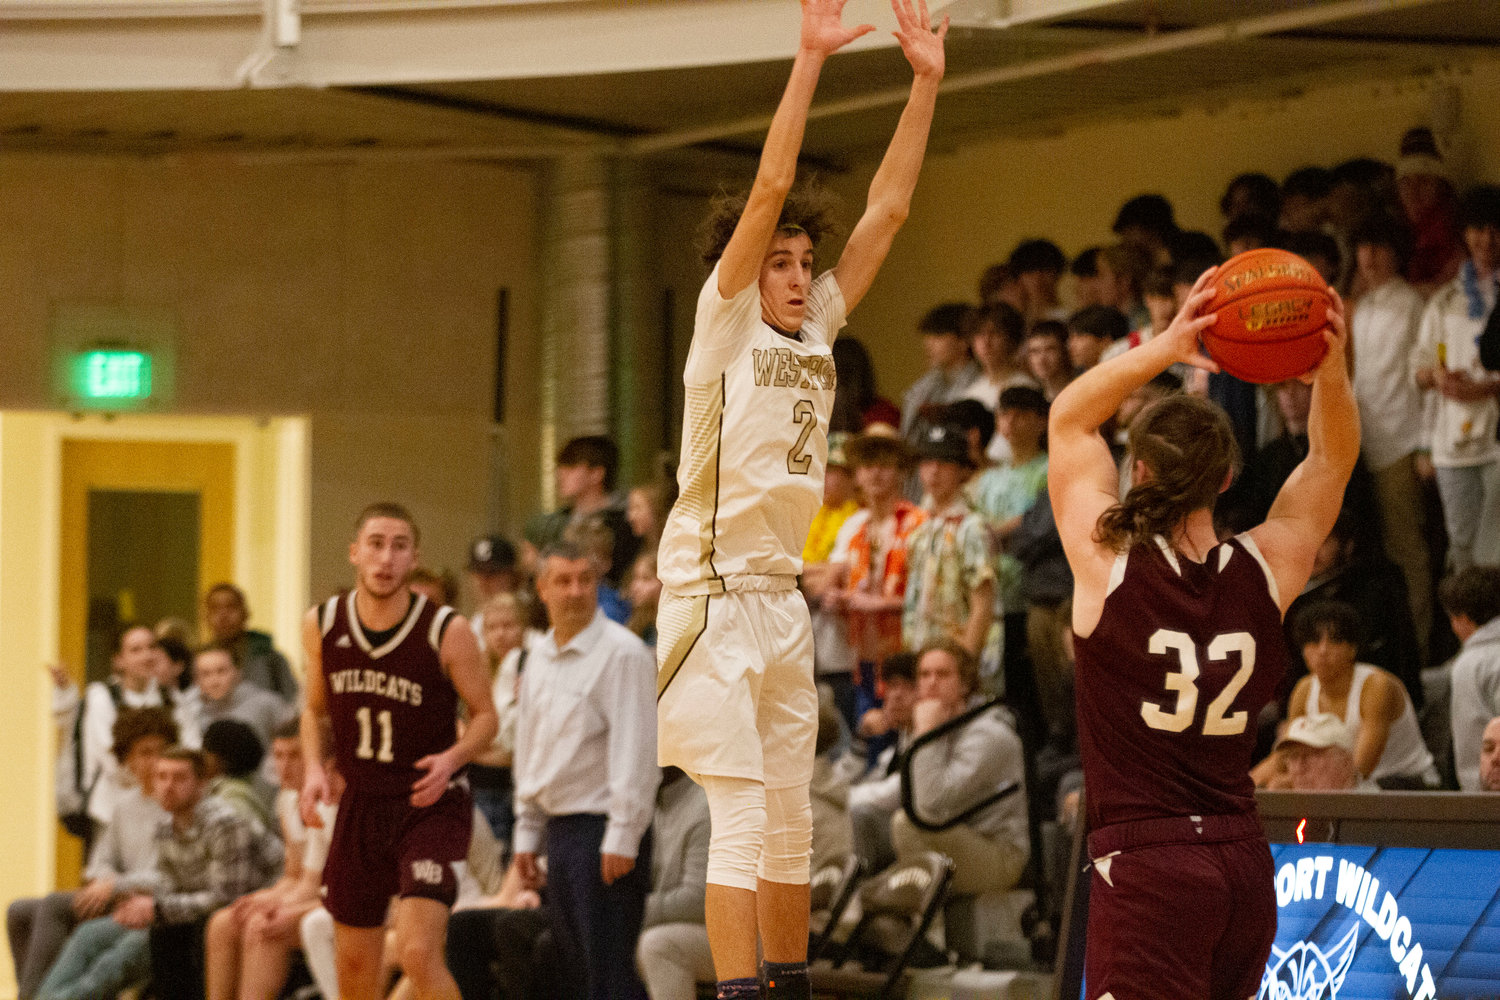 Ben Boudria leaps into the air to block a West Bridgewater pass during a full court press.